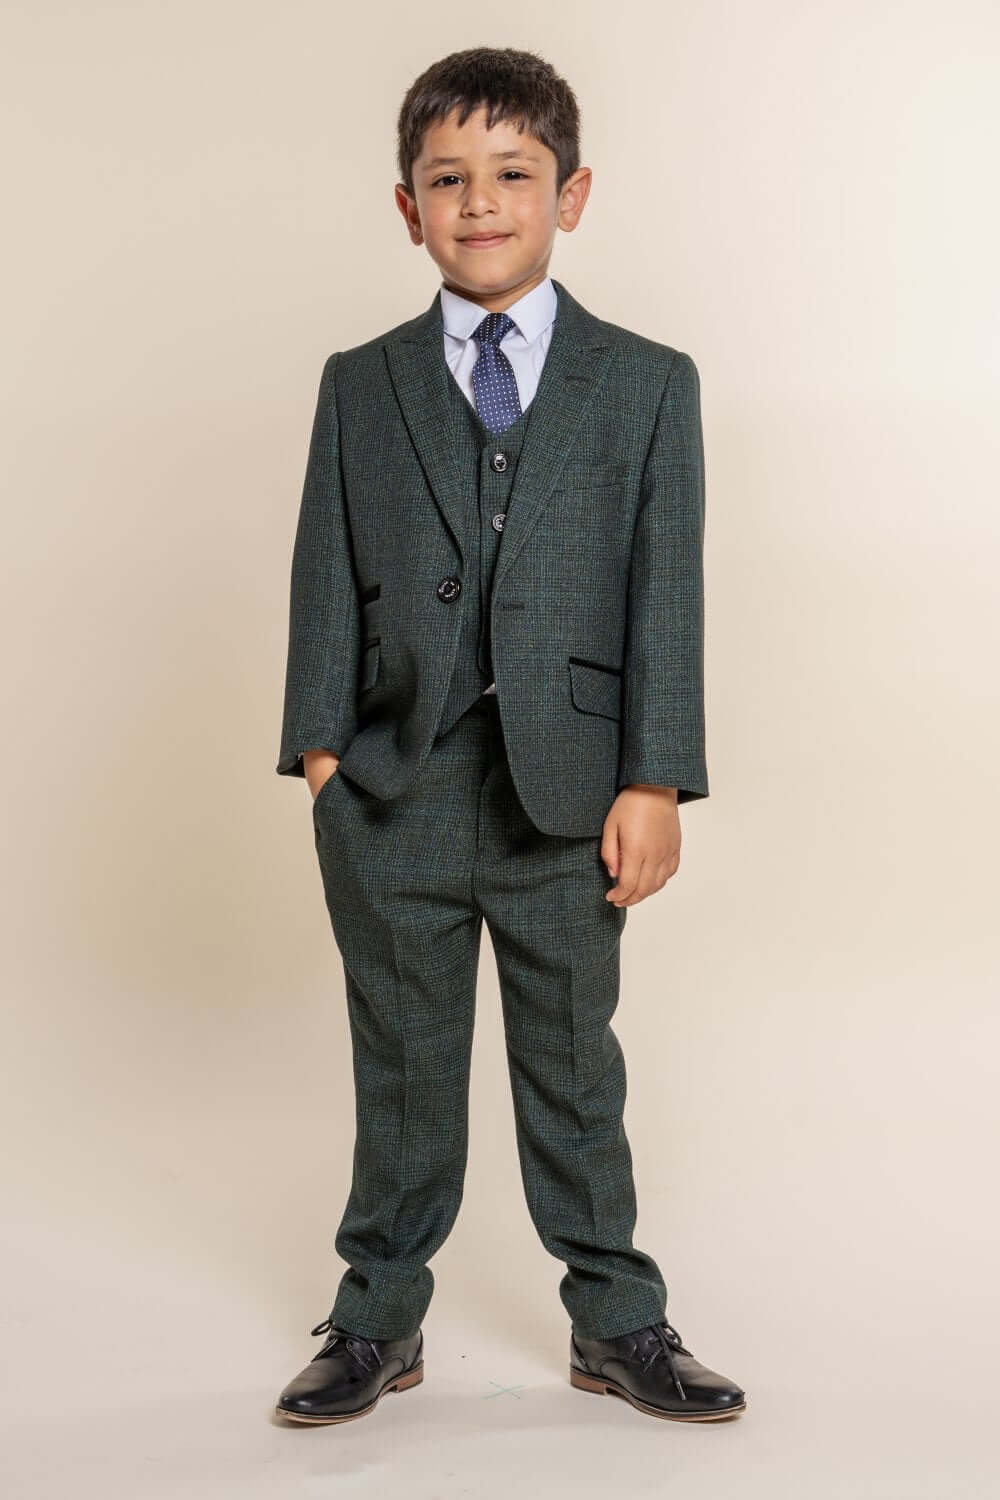 Young boy wearing Olive Green Suit